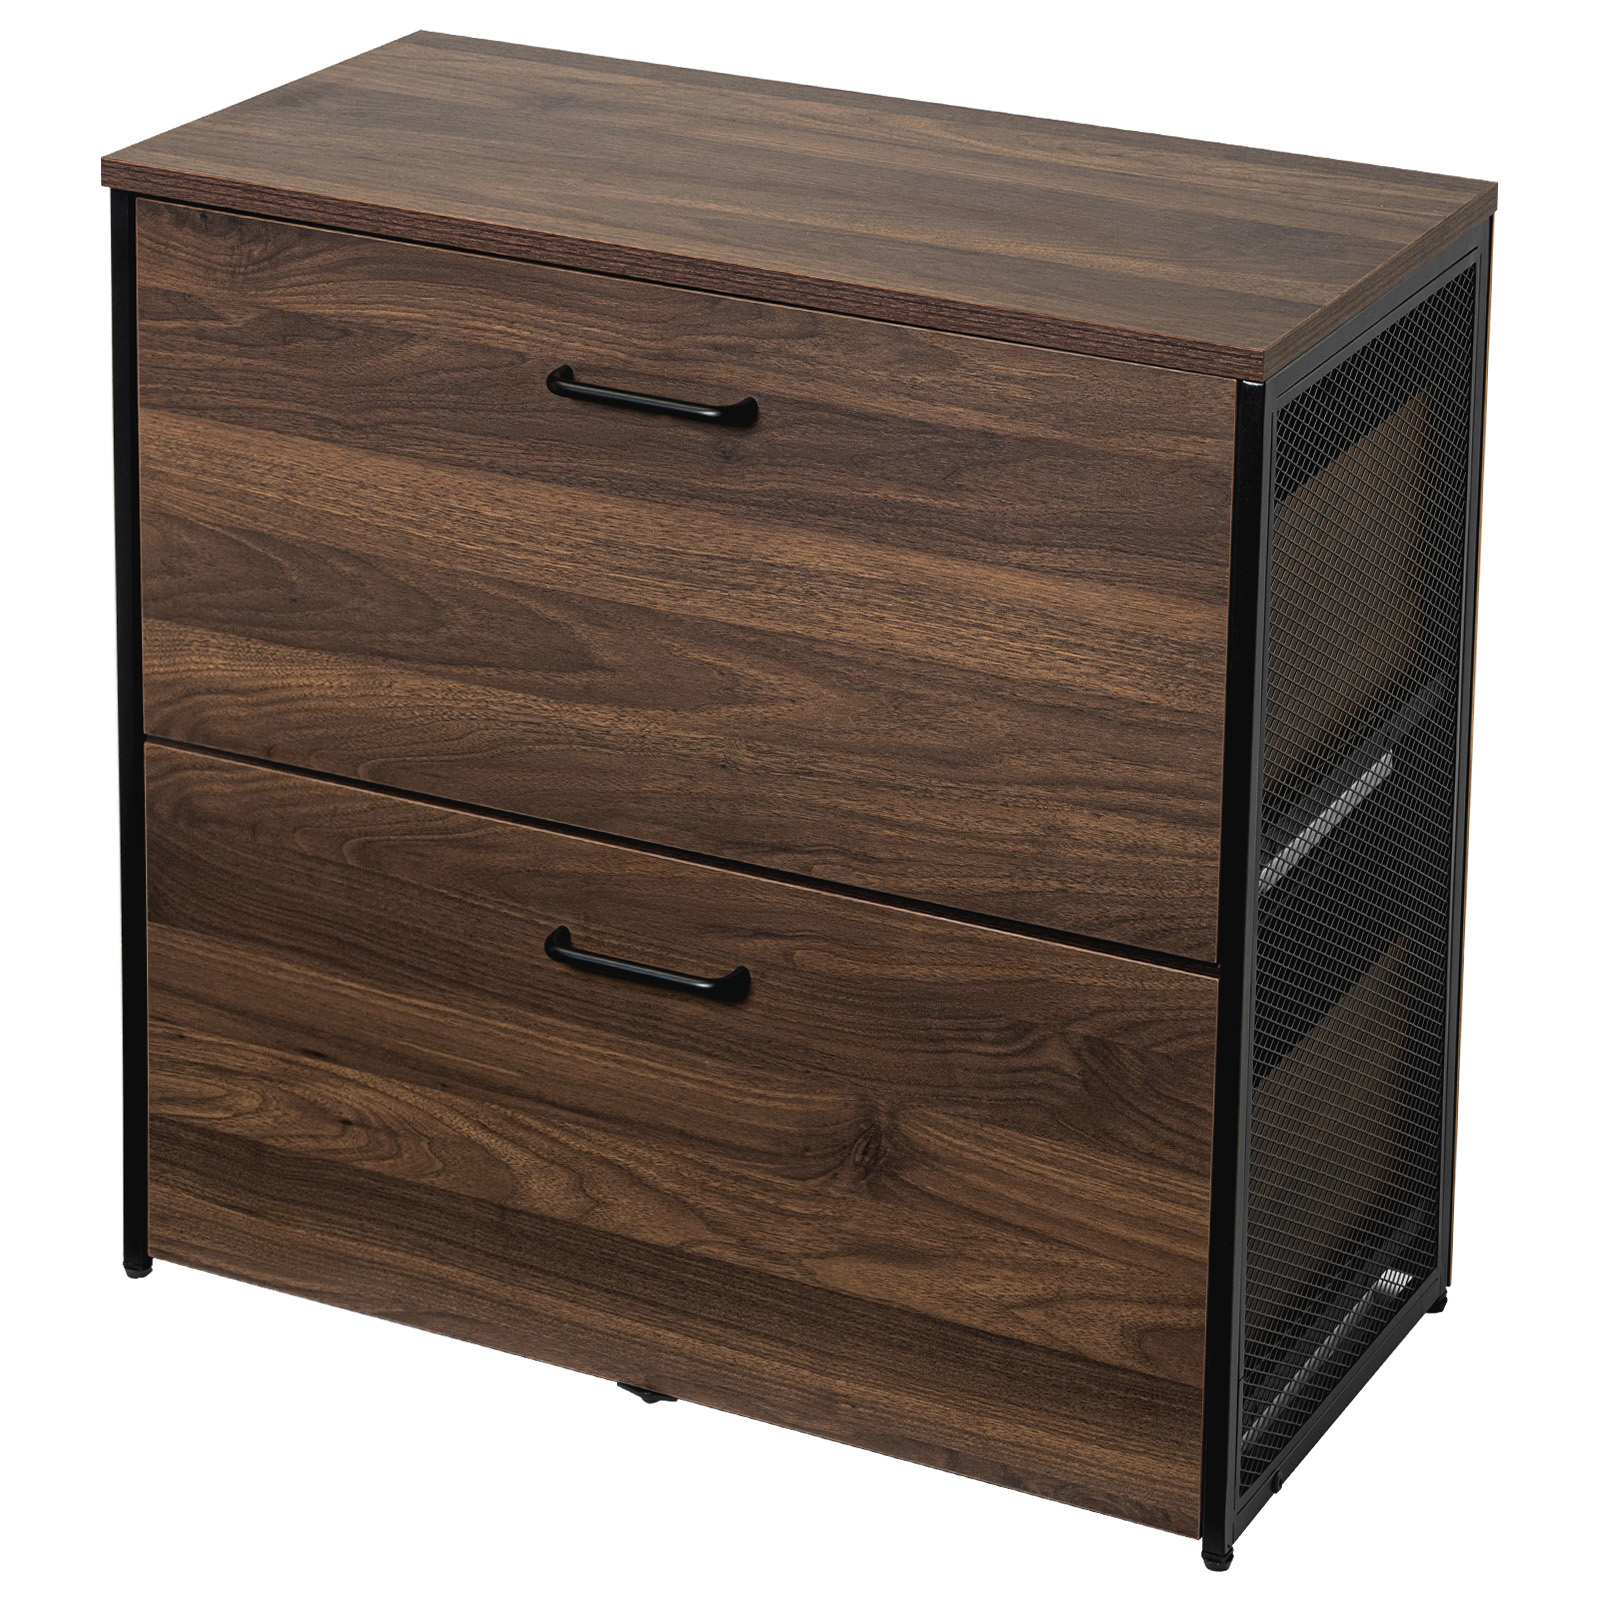 TOPSKY 2 Drawers Wood Lateral File Cabinet for Letter Size/A4/Legal File Full Extension Soft Close Concealed Slide DS-001